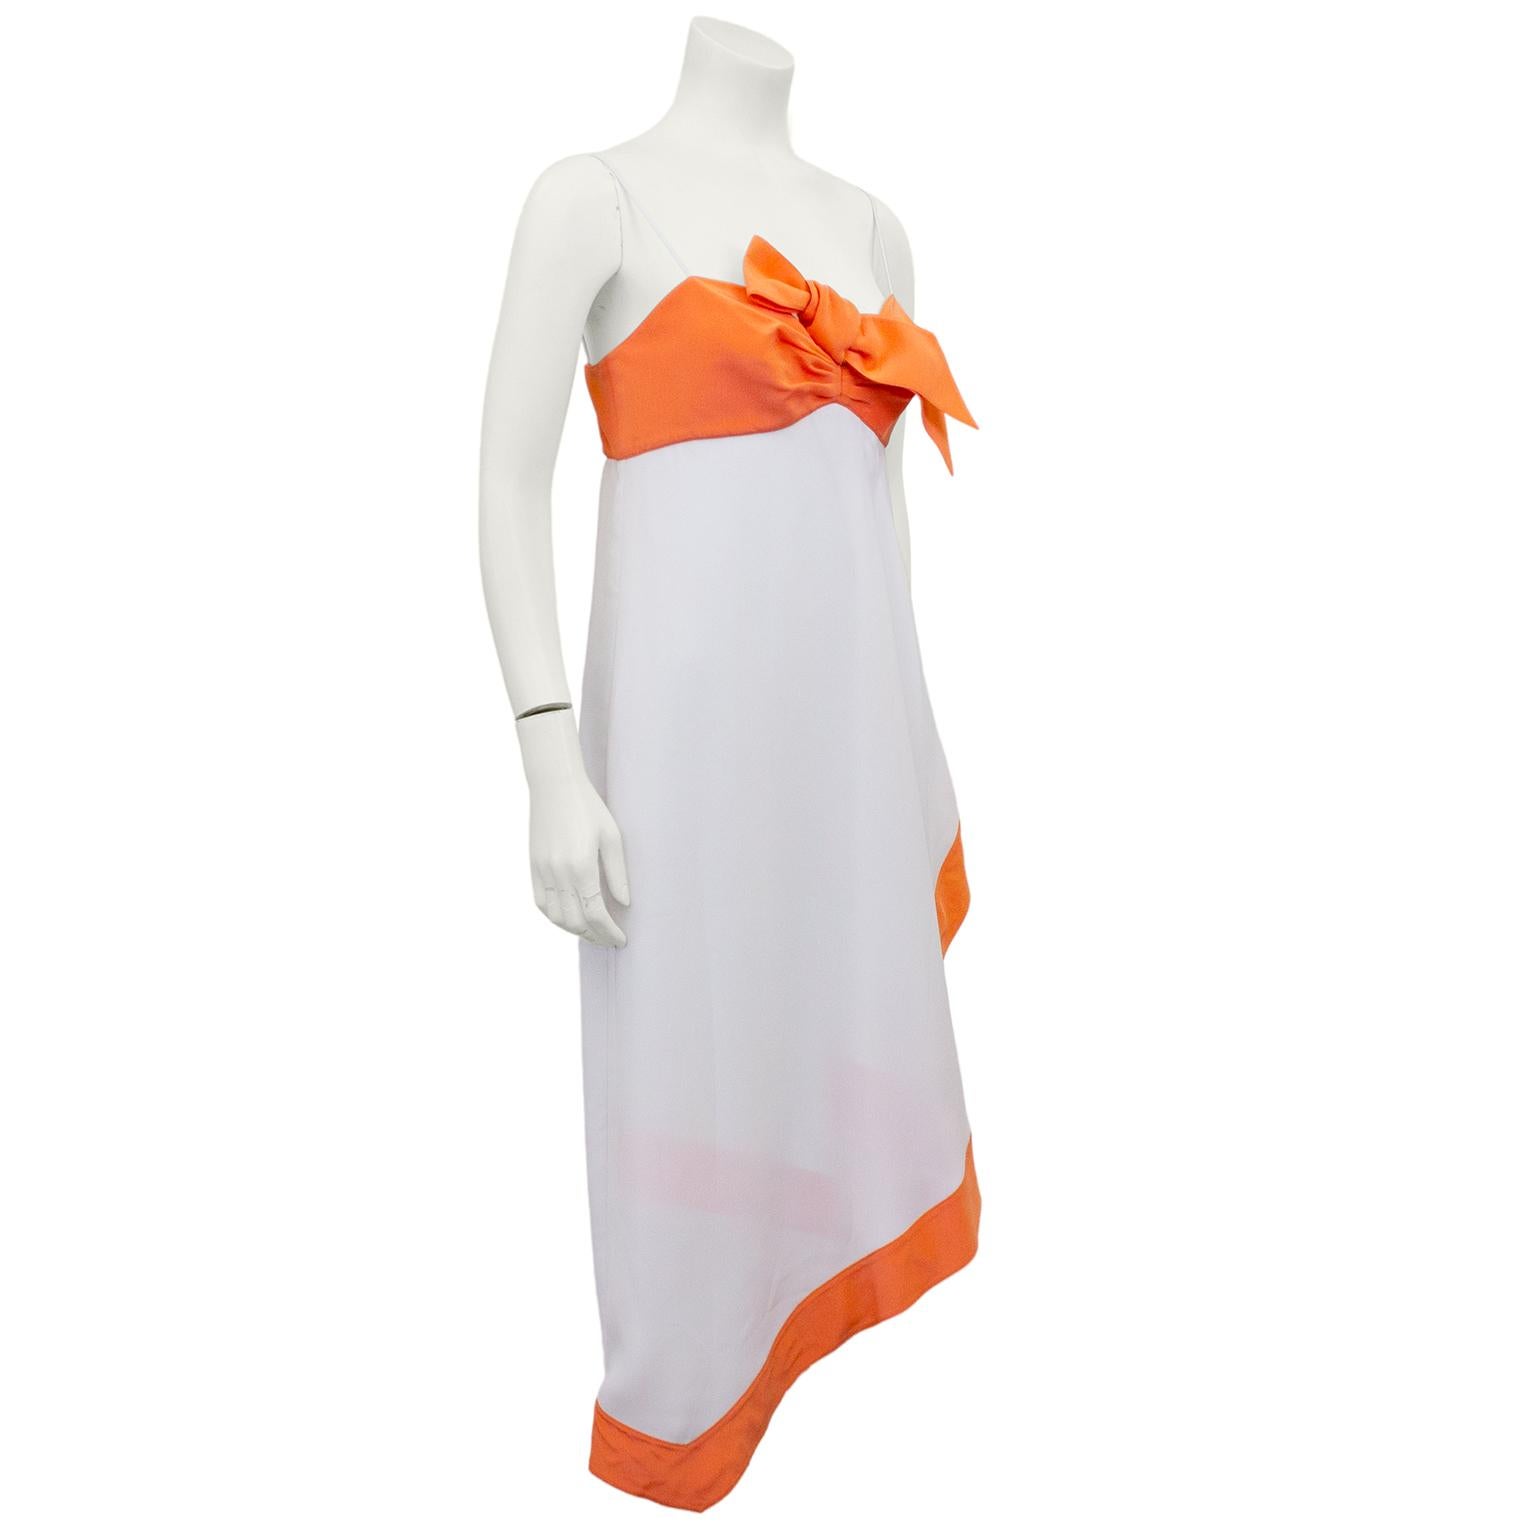 Thierry Mugler colour block silk cocktail dress from the 1990s. Orange bust with large bow. Empire waist with white diagonal cut hanky hem skirt with orange trim. Skirt is draped beautifully, in that iconic Mugler craftsmanship. Spaghetti straps.